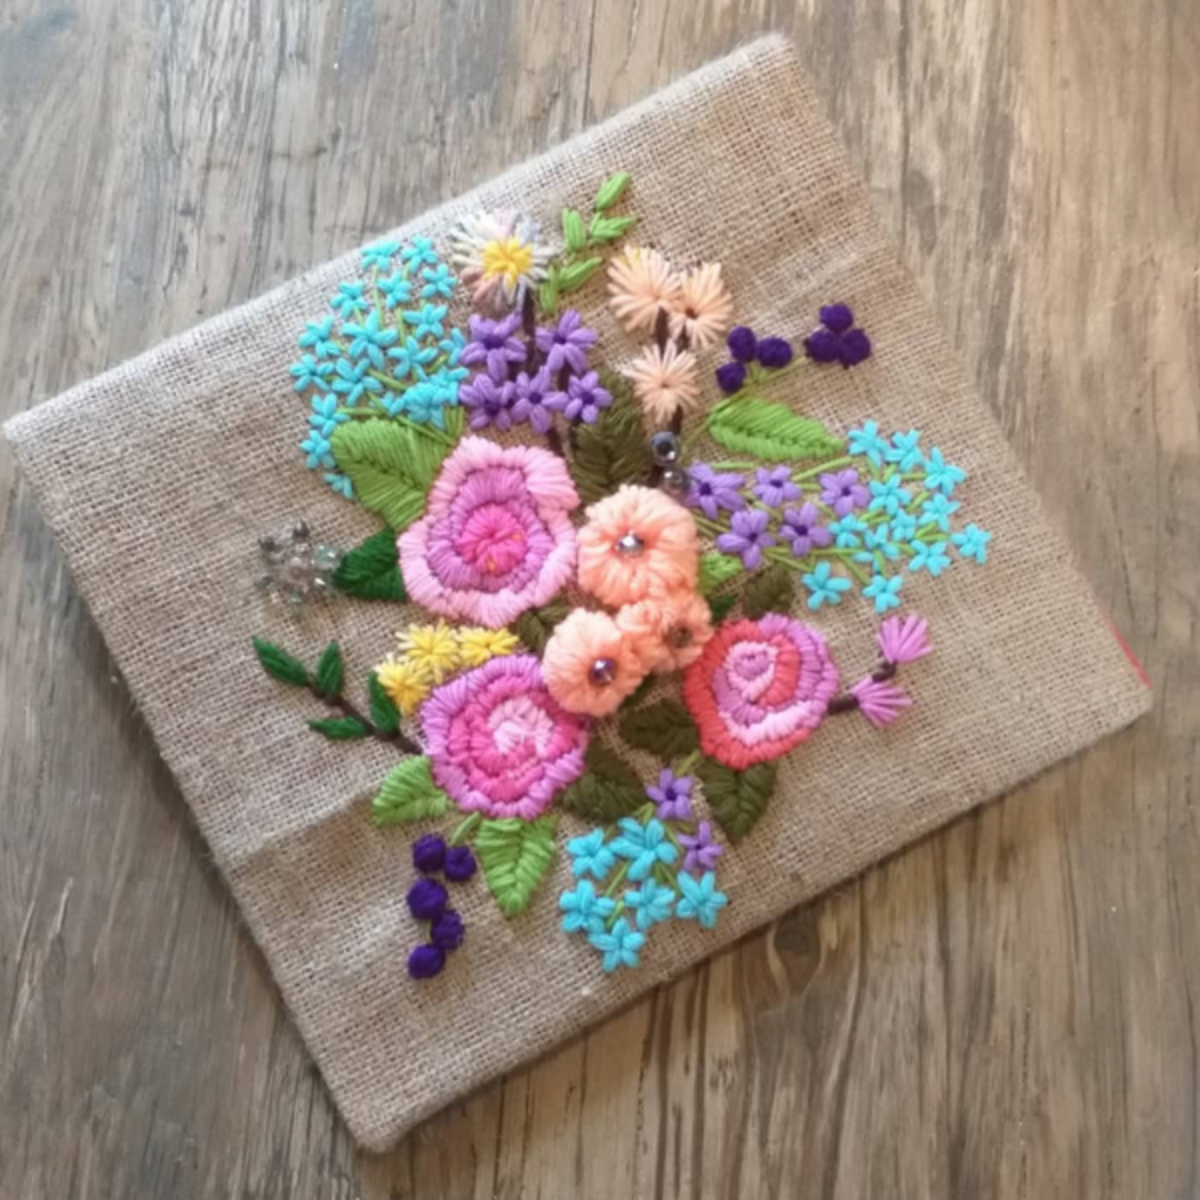 How to Make an Embroidered Floral Calendar